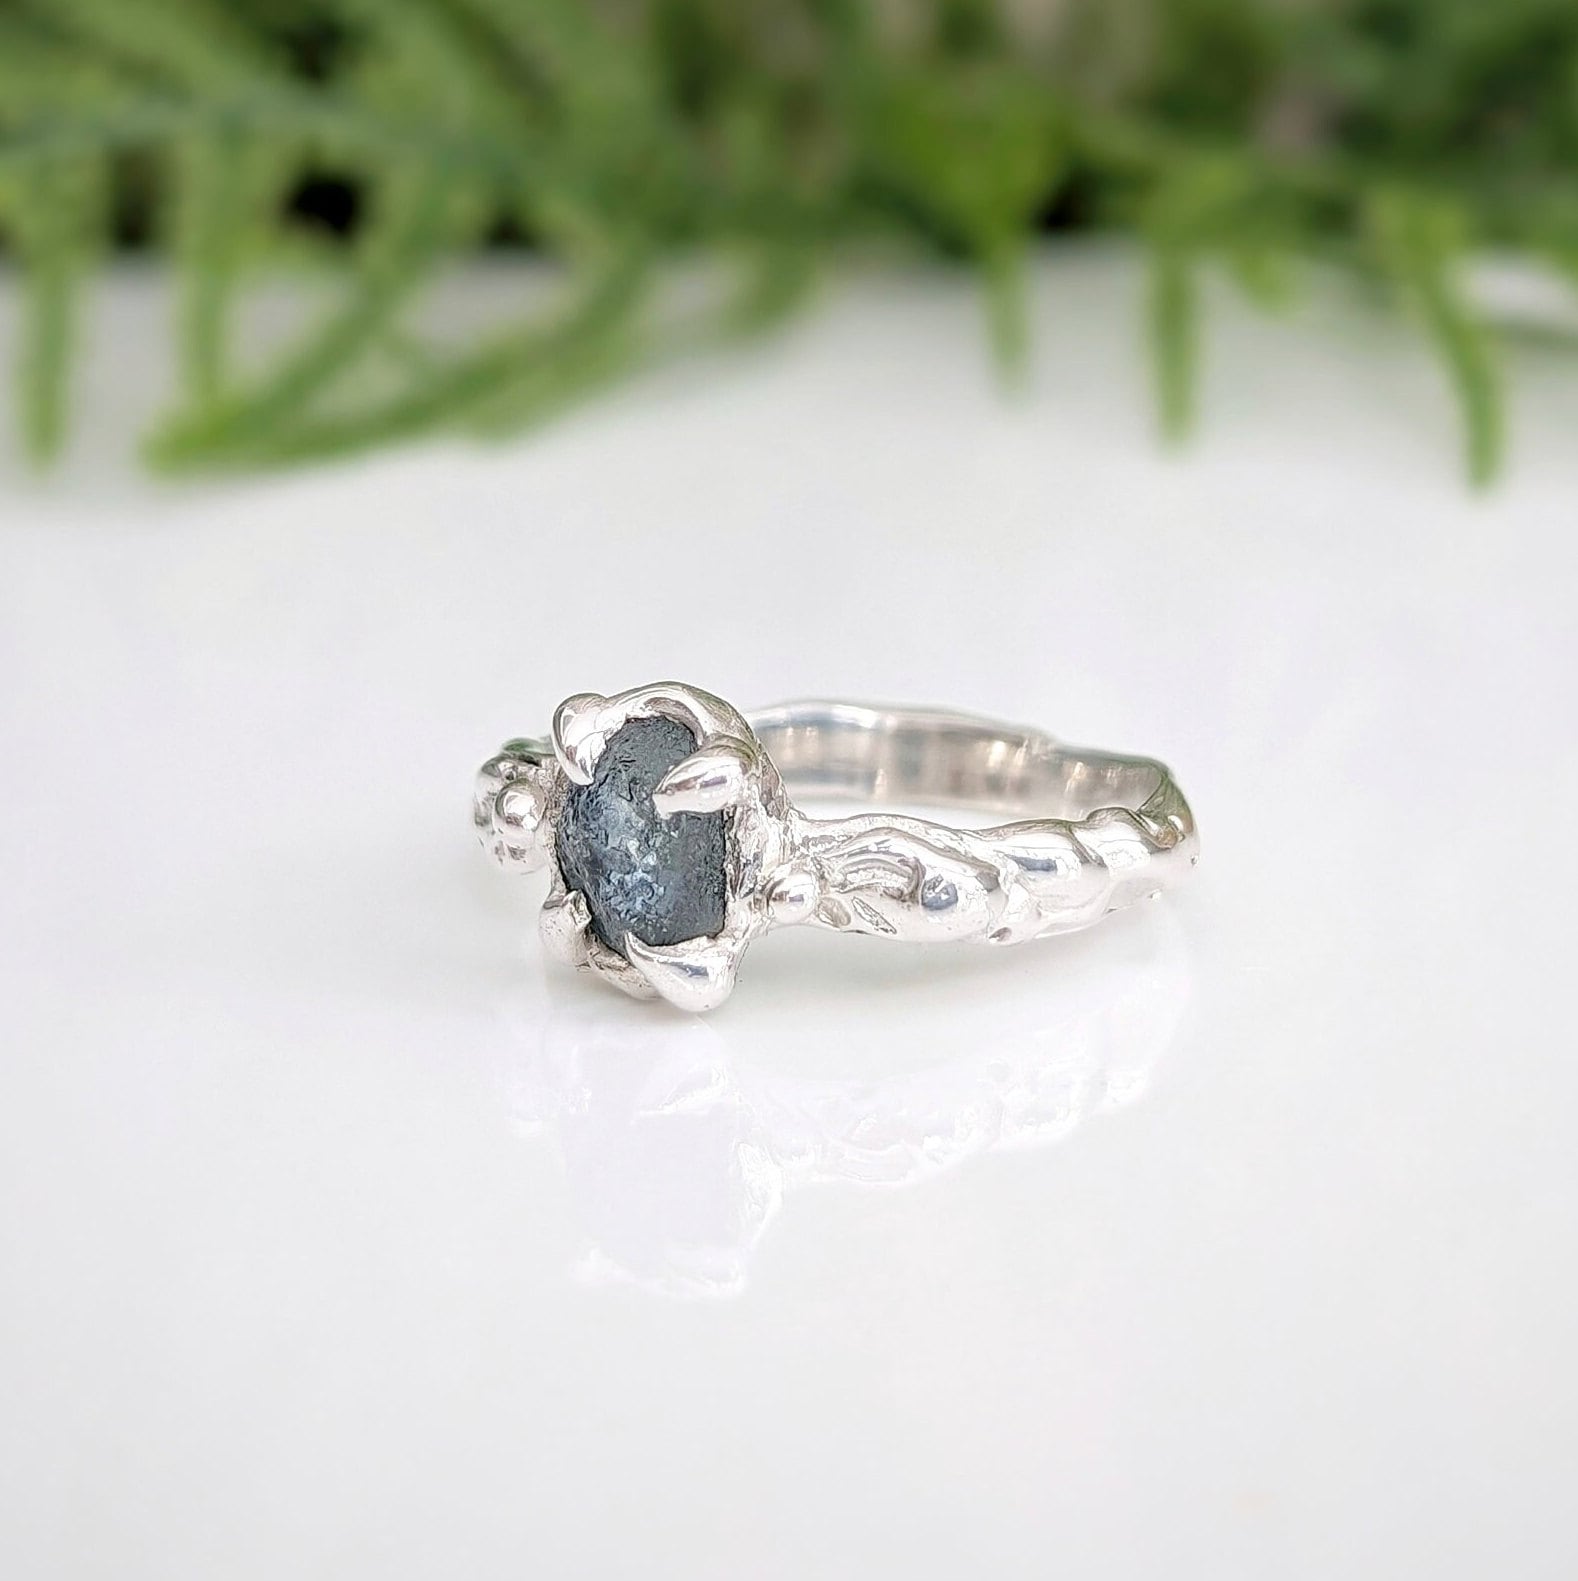 Raw Montana Sapphire set by prongs on a Molten Silver textured band